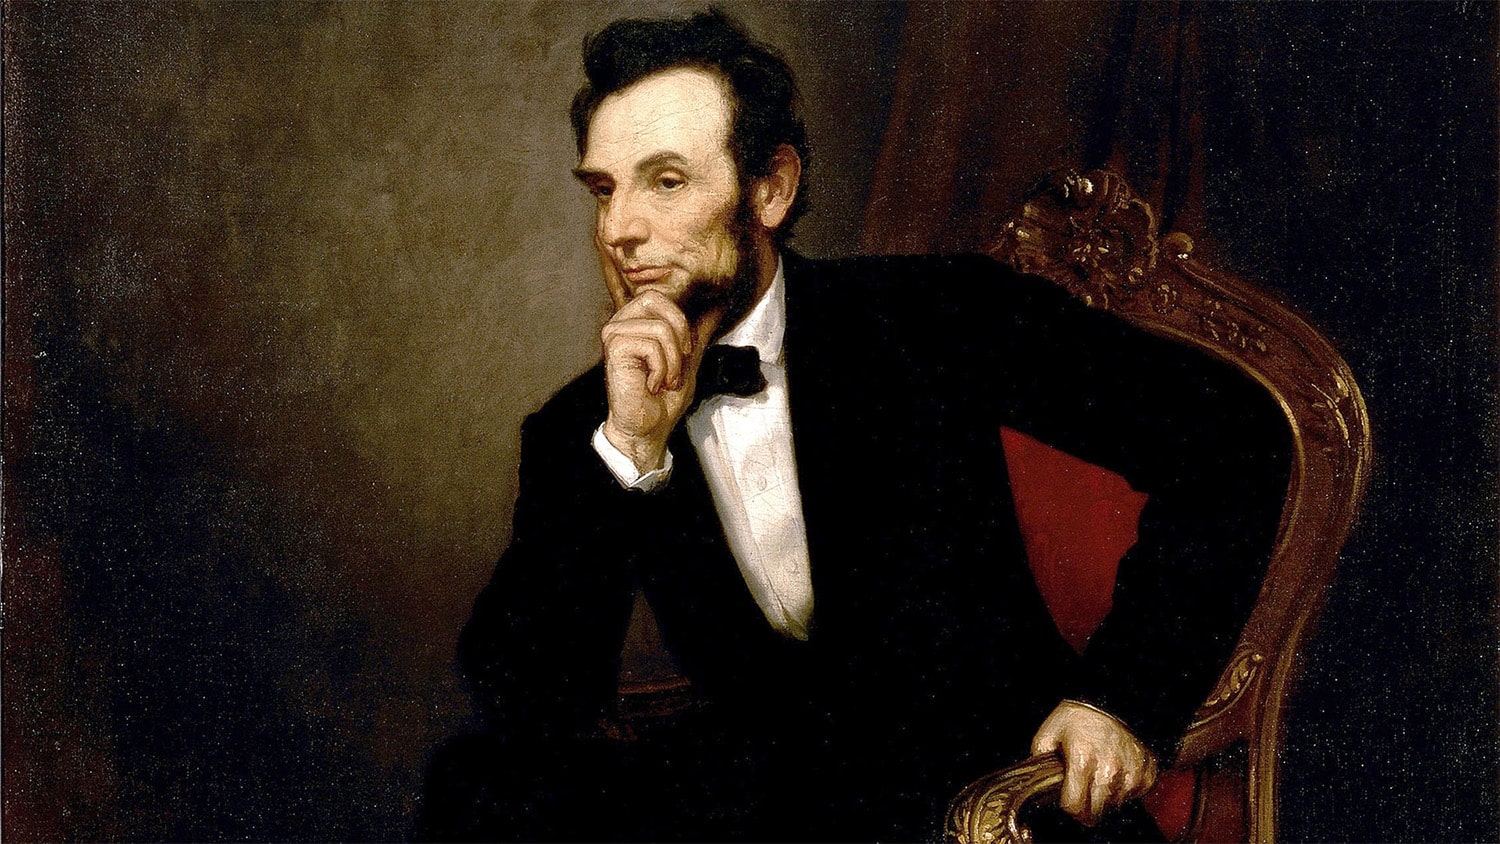 32 interesting facts about Abraham Lincoln